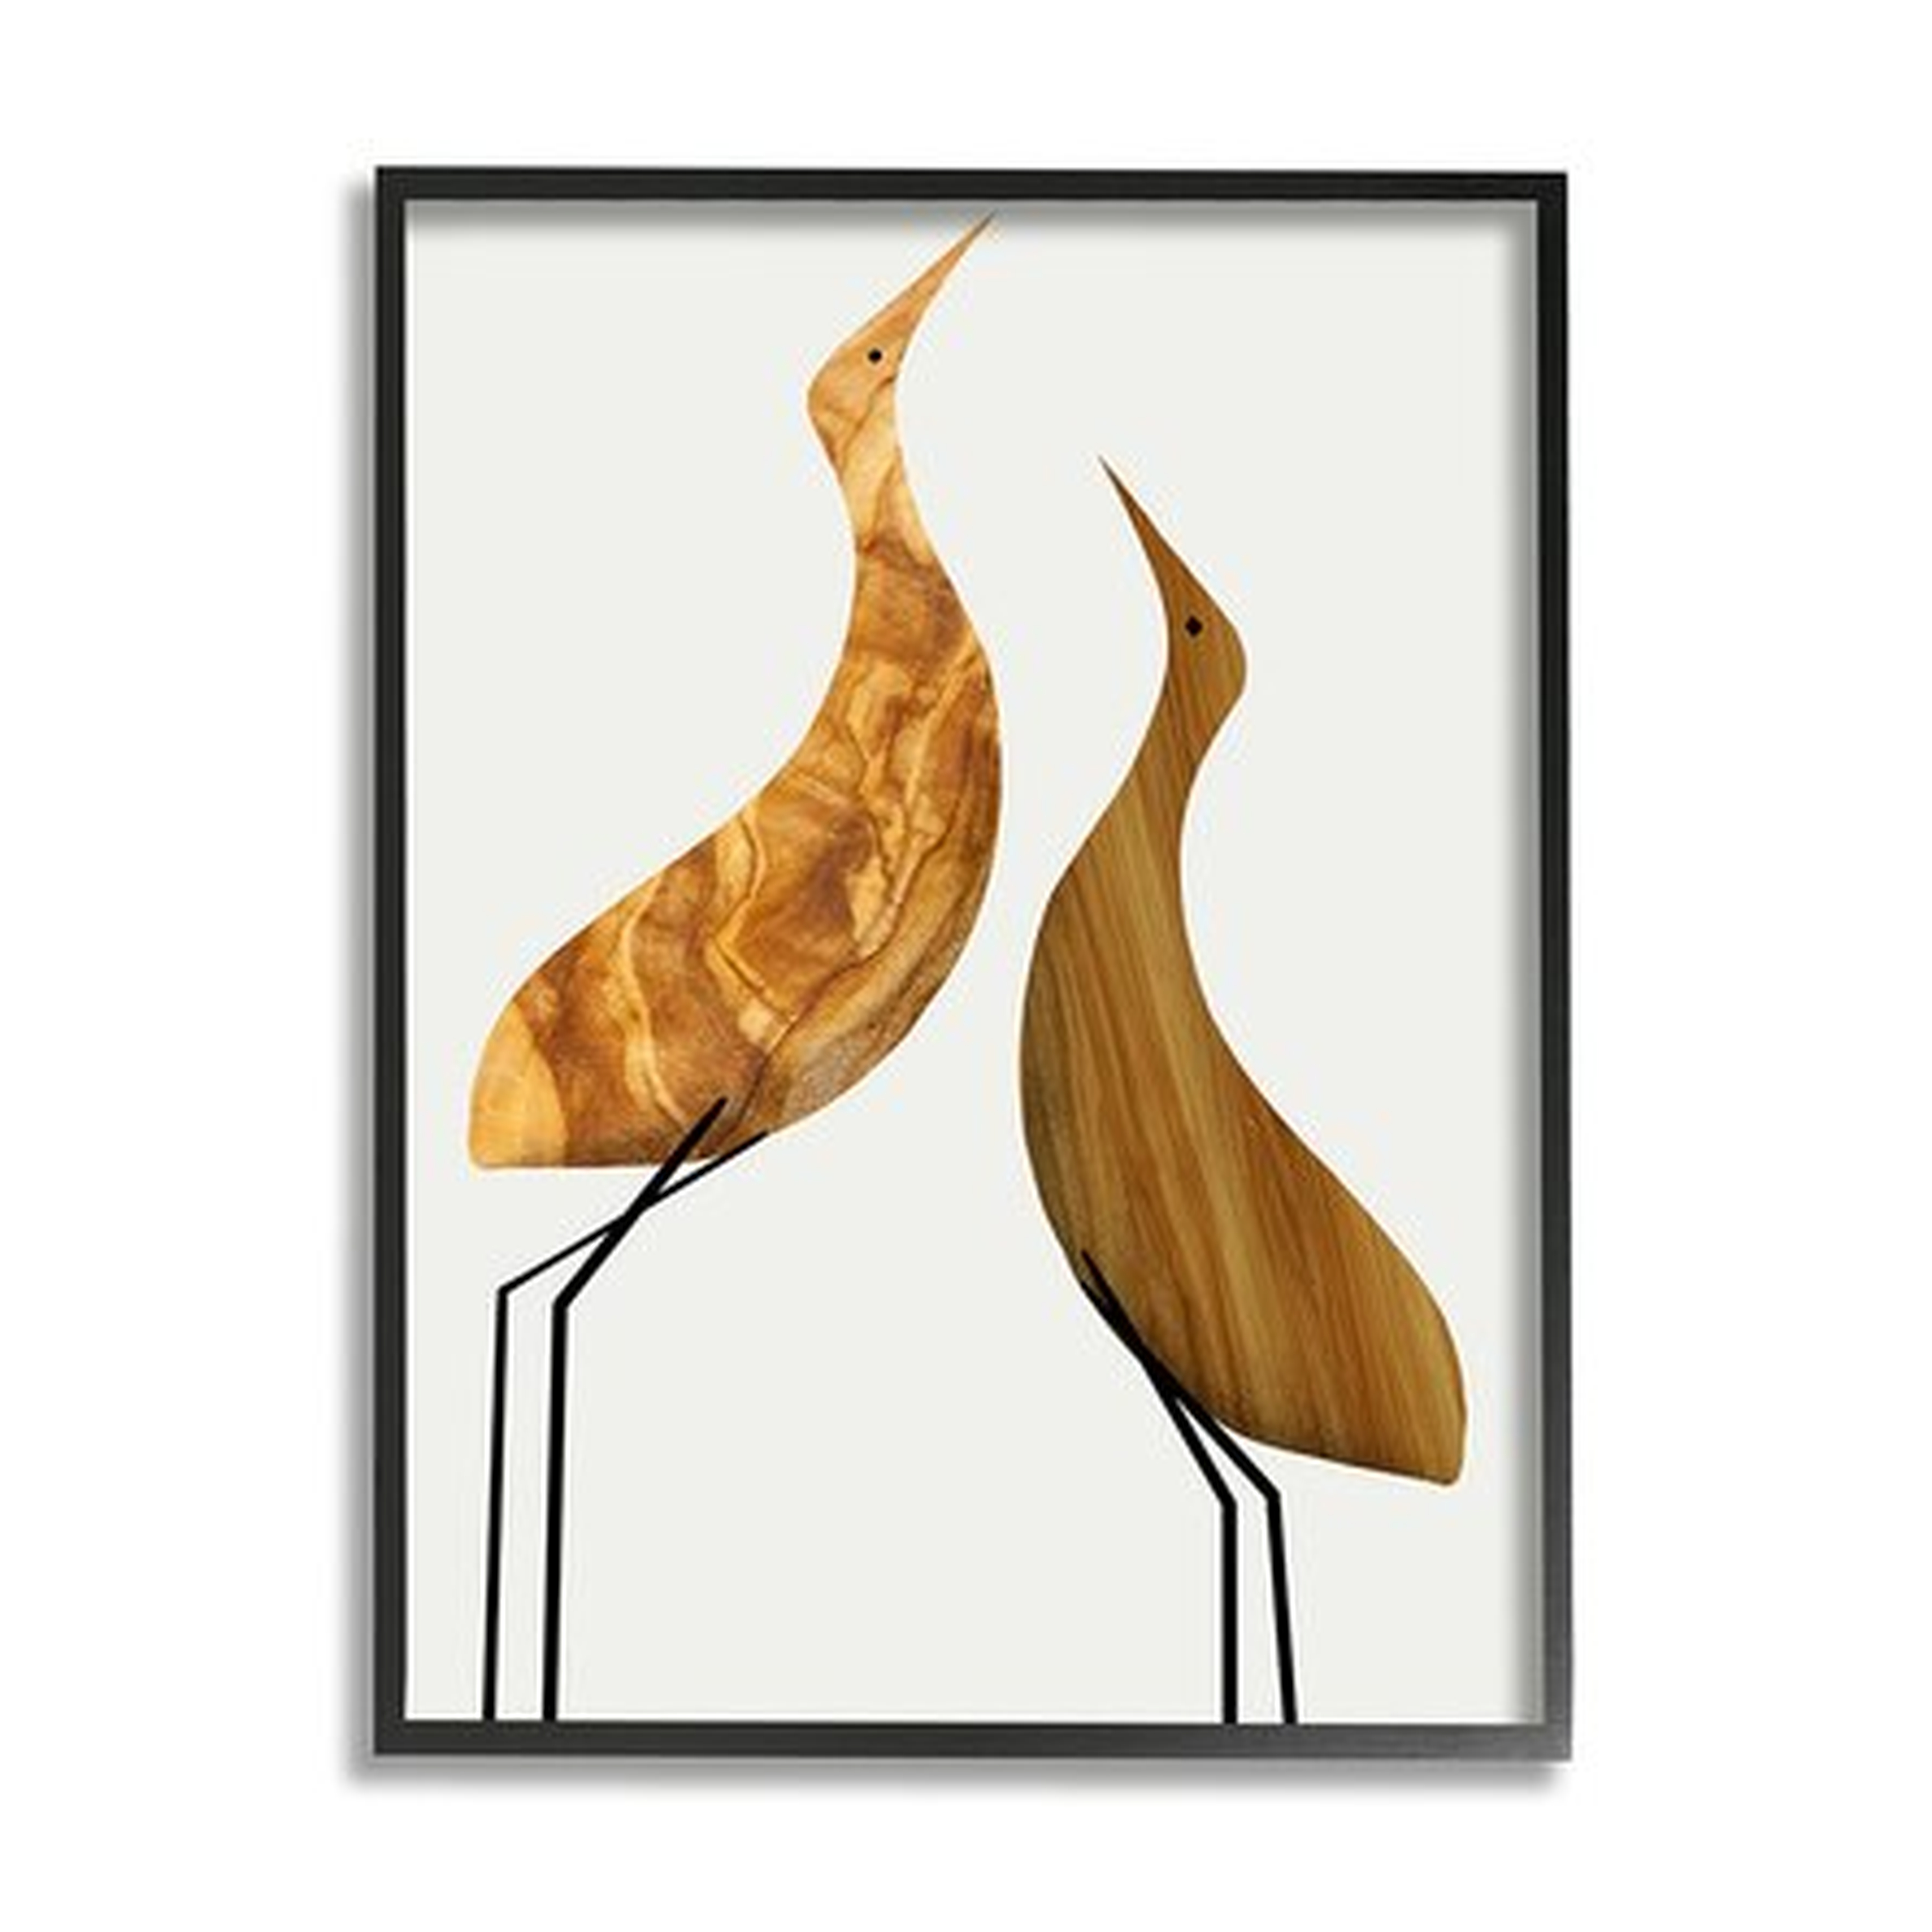 Modern Rustic Tree Patterned Birds Minimal Abstract by Daphne Polselli - Graphic Art - Wayfair